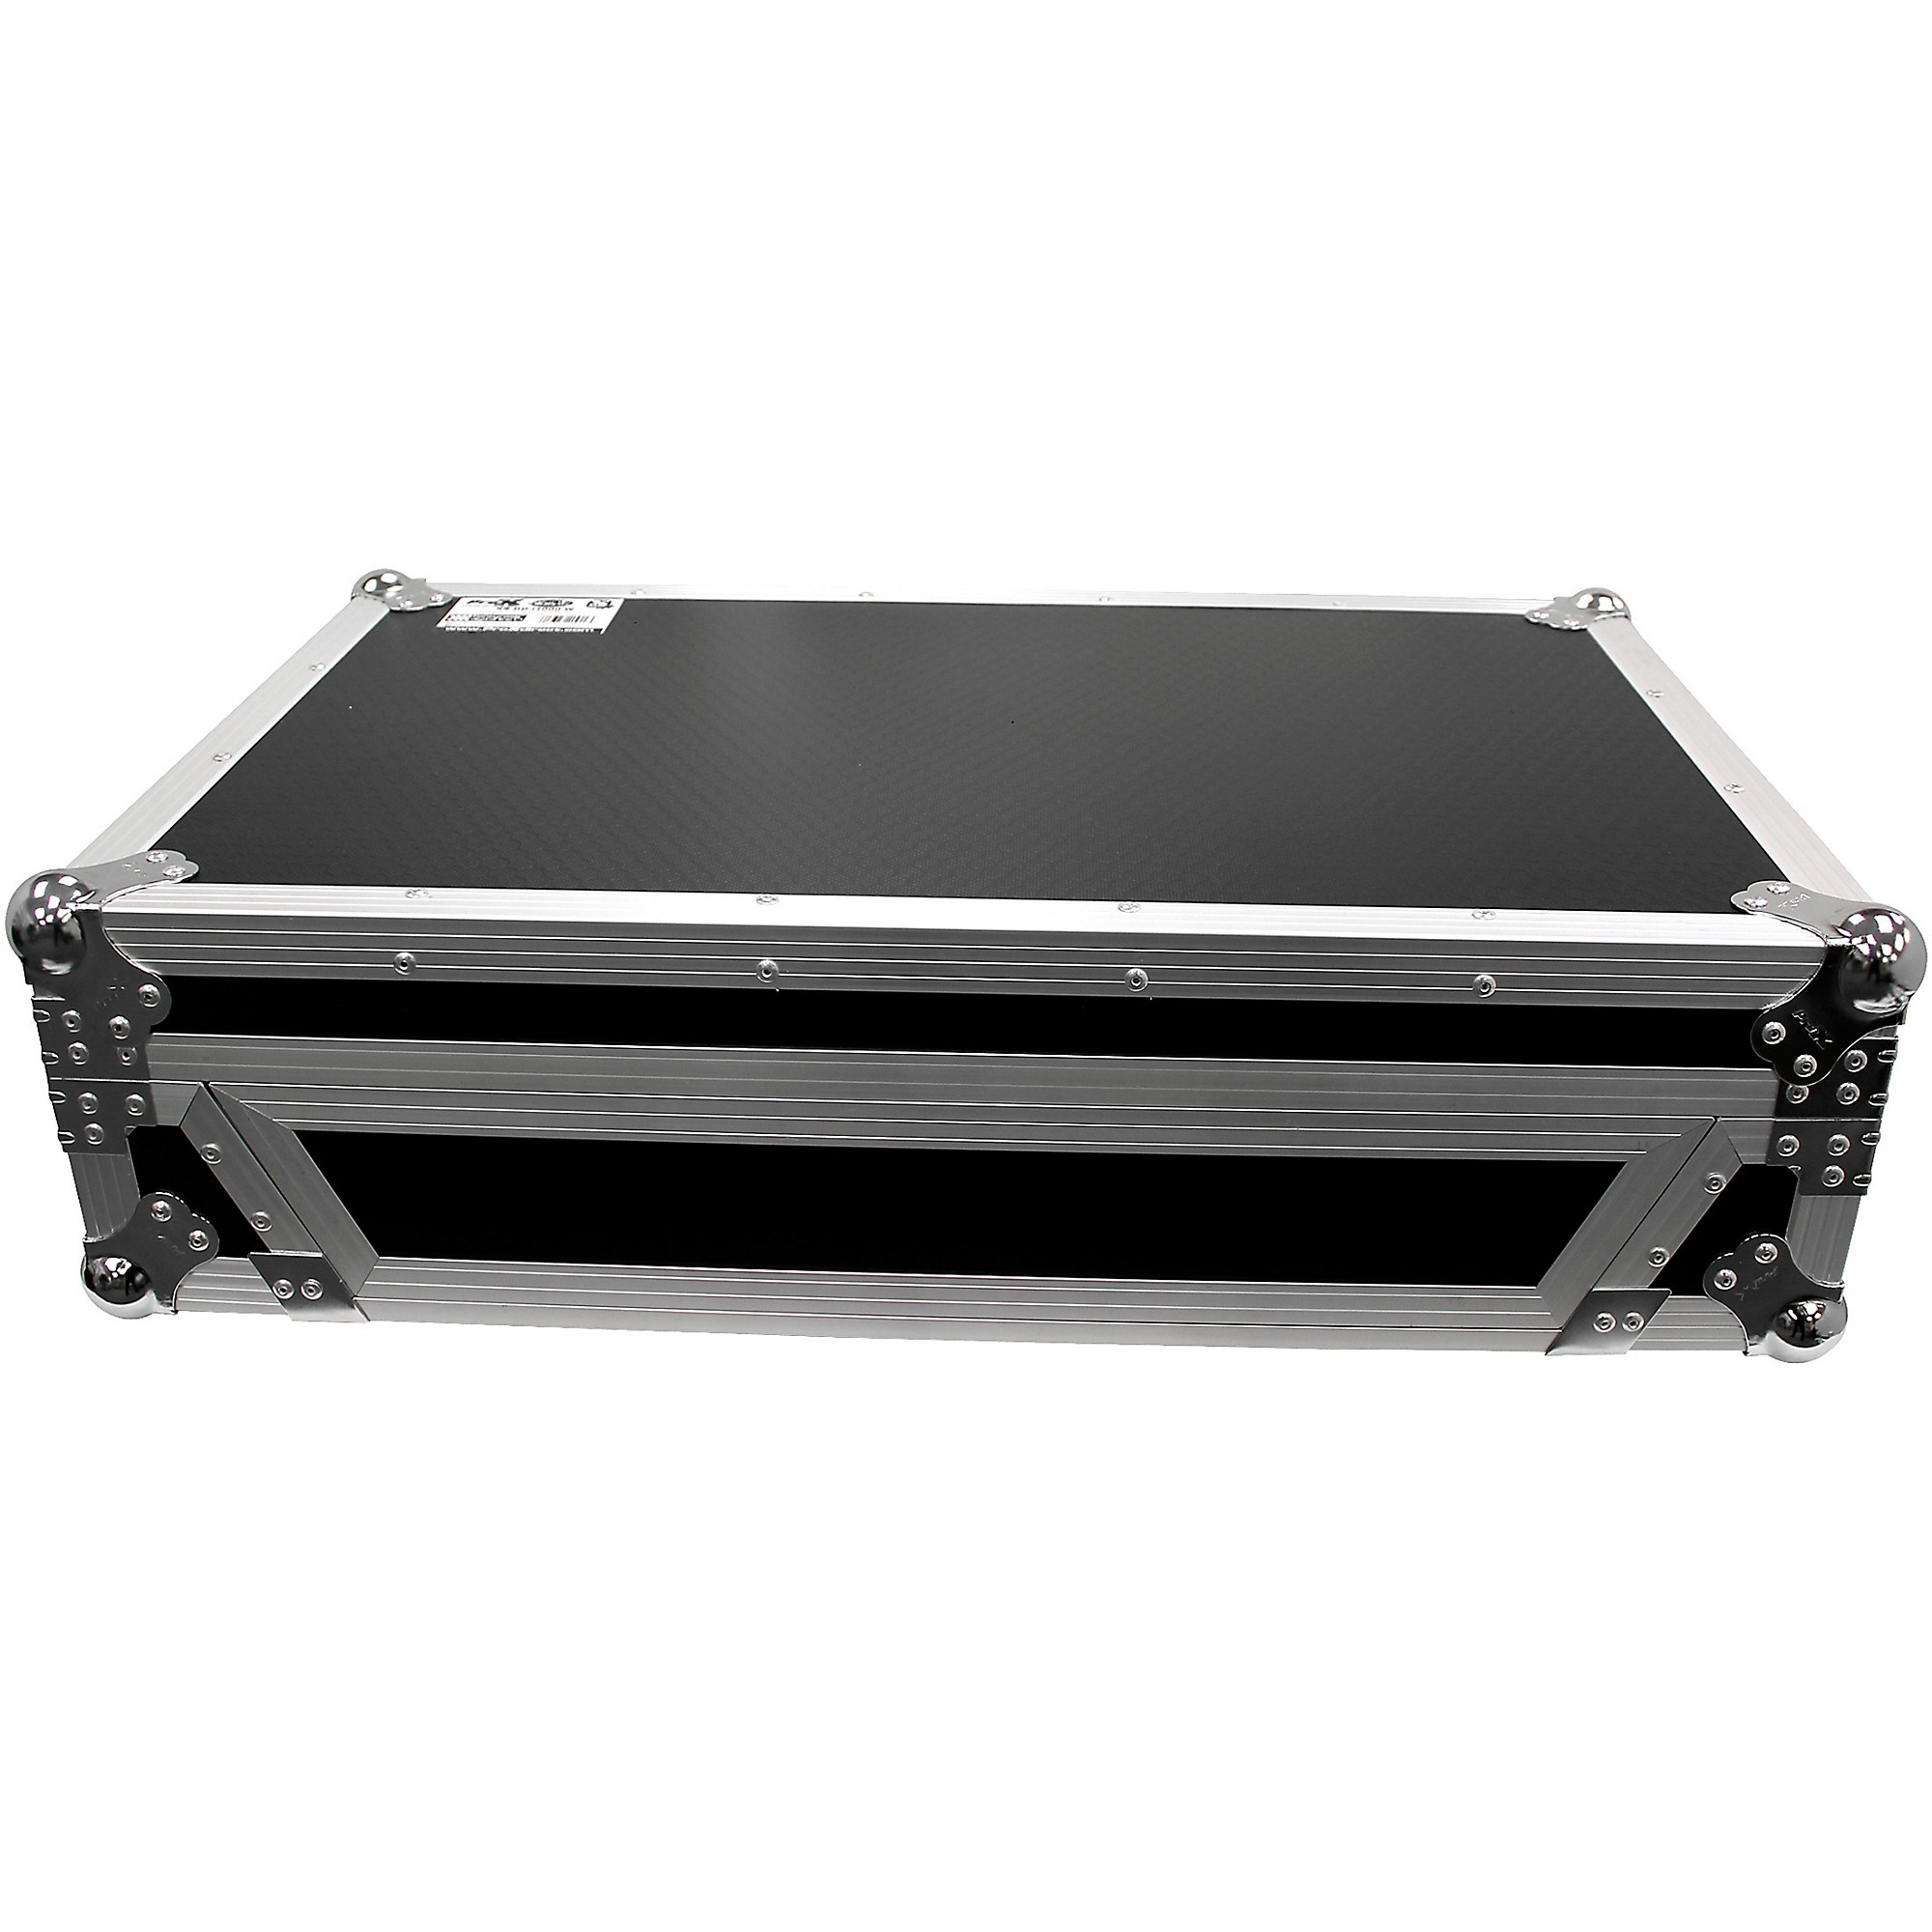  ProX Flight Case for RANE ONE DJ Controller with Sliding Laptop  Shelf, 1U Rack, and Wheels - High-Density Protective Foam for Interior  Support - Finish on Laminated 3/8 Plywood - XS-RANEONE